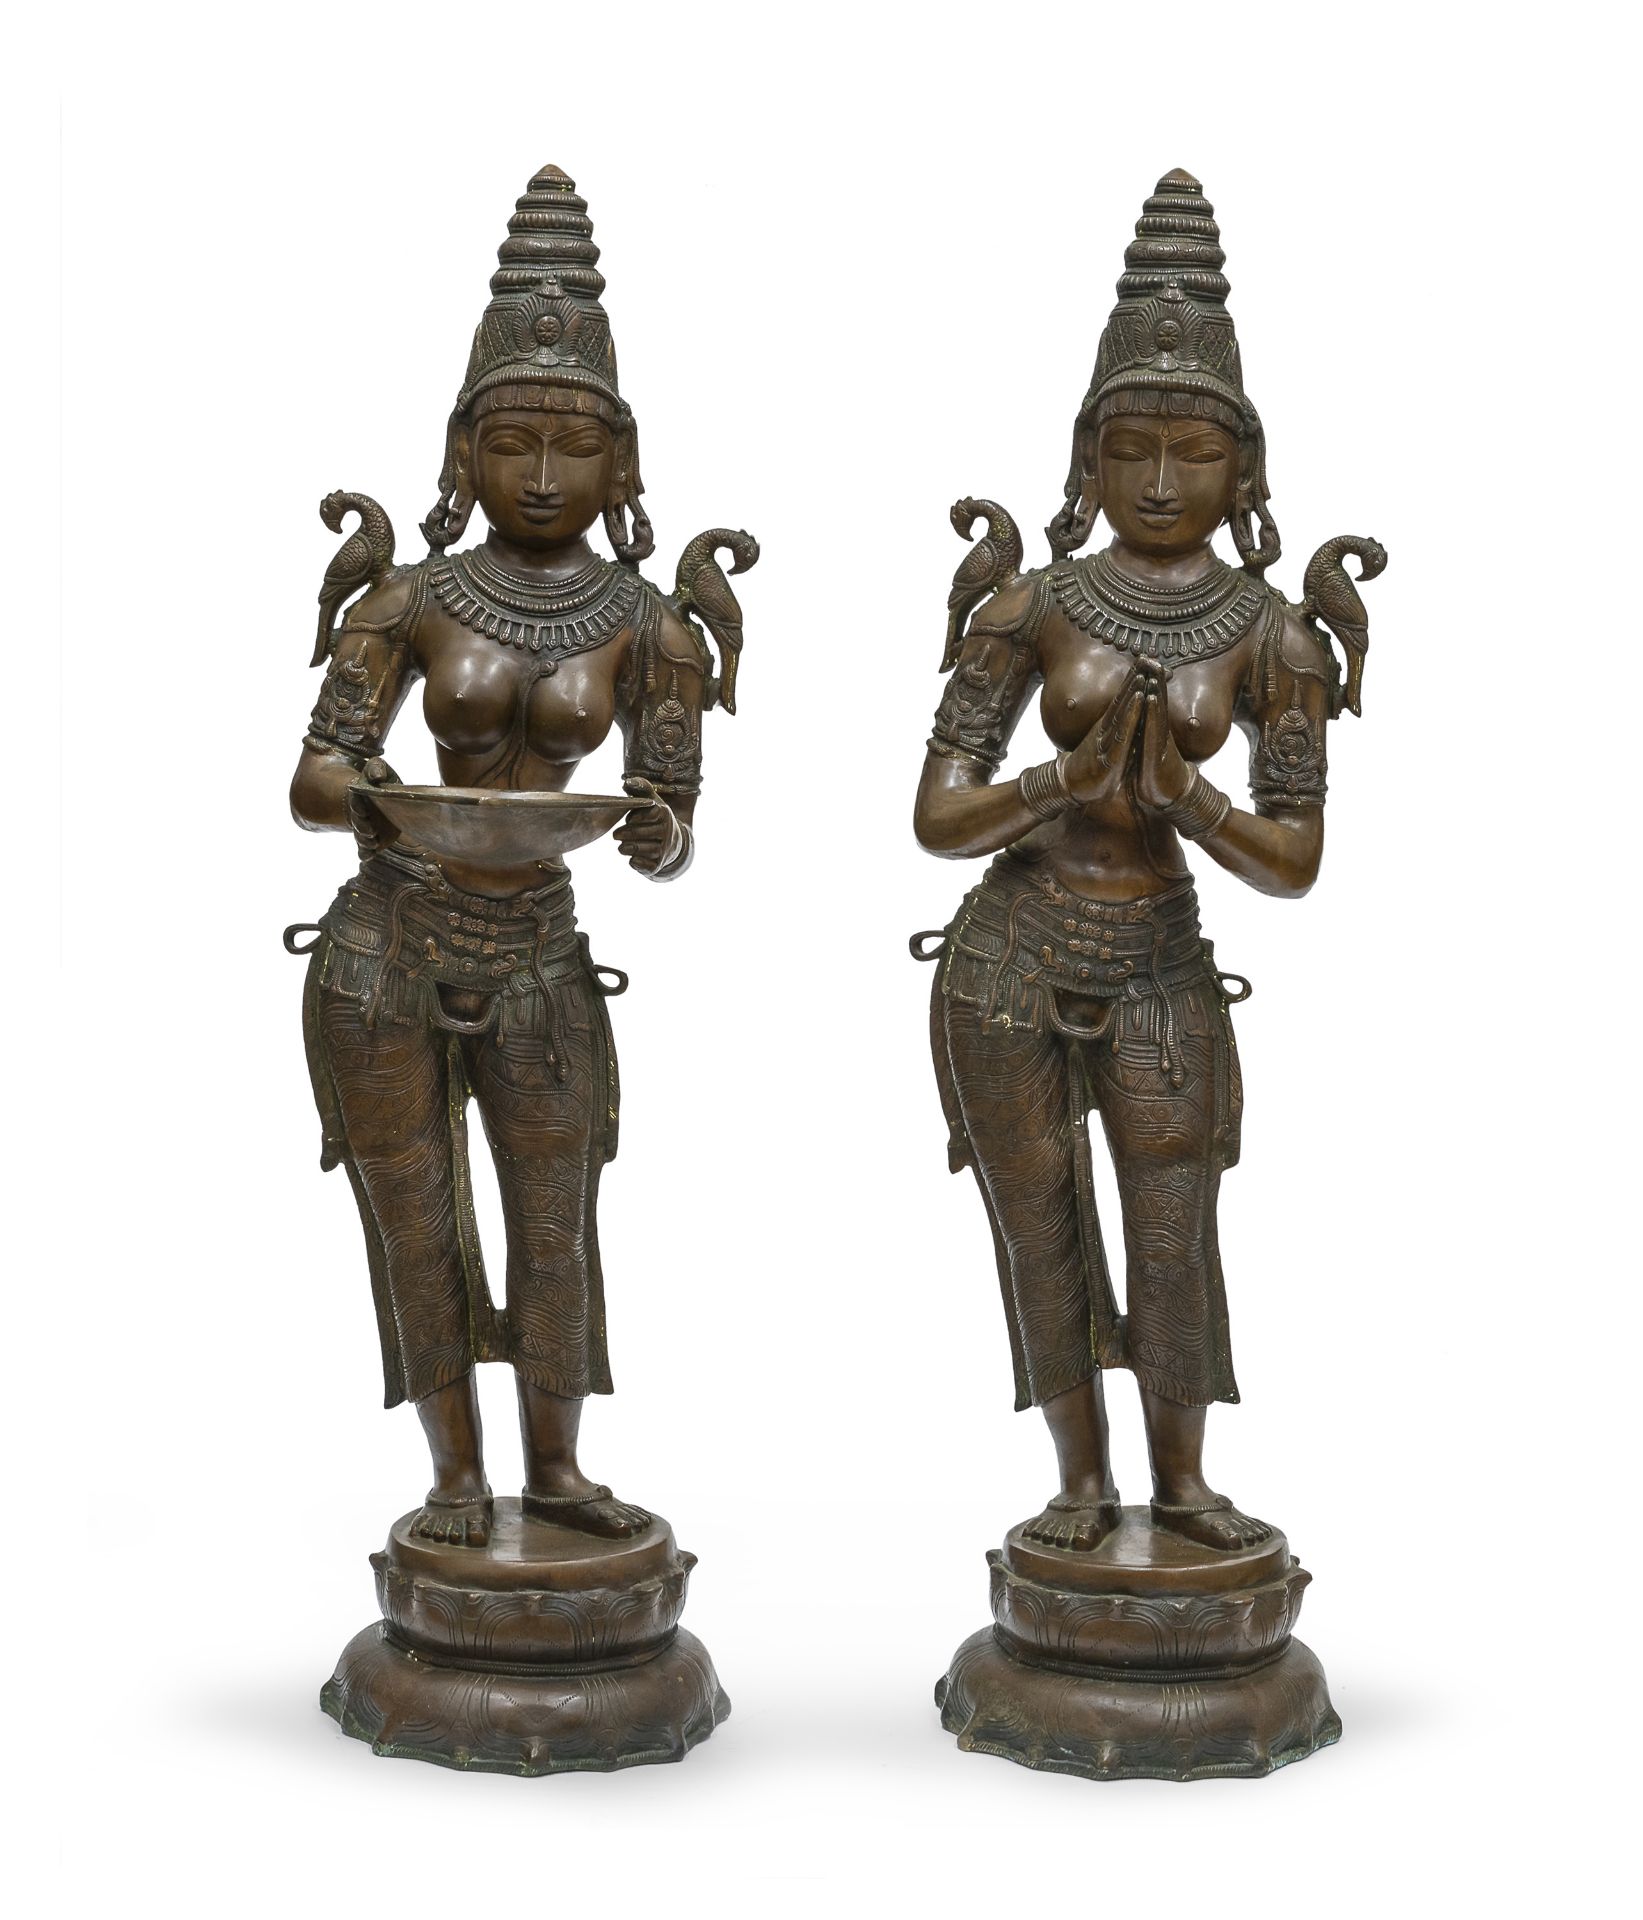 A PAIR OF INDIAN BURNISHED BRONZE SCULPTURES DEPICTING DEEPALAKSHIMI 20TH CENTURY